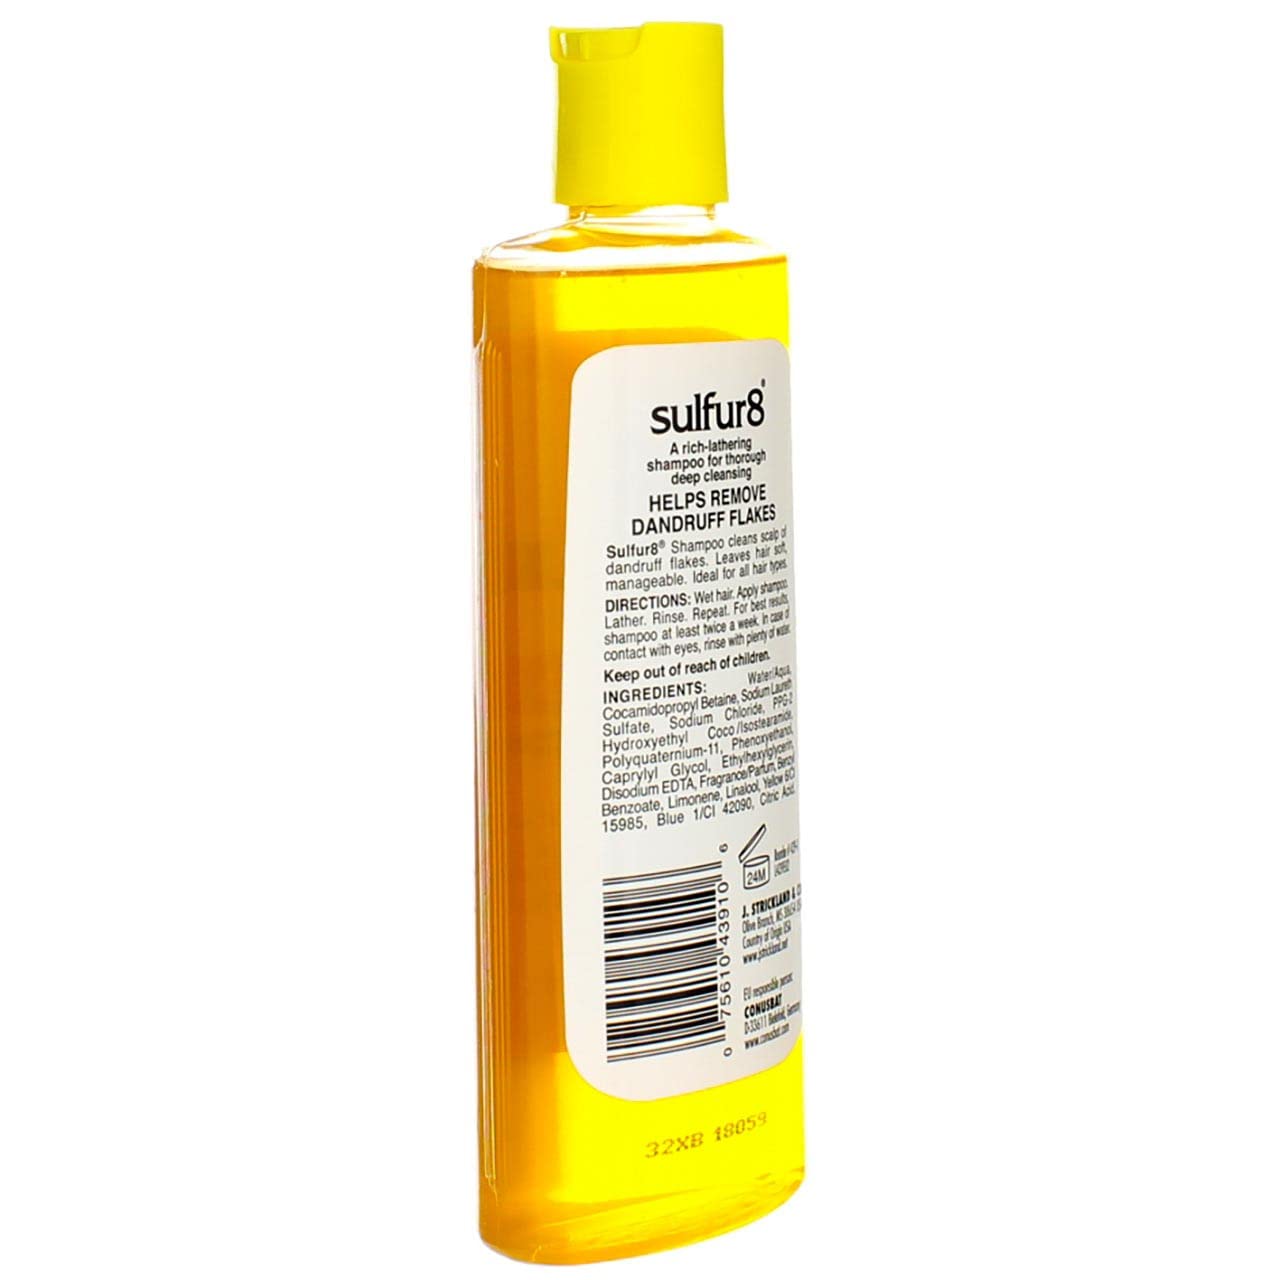 Sulfur8 Medicated Shampoo 7.50 oz Find Your New Look Today!